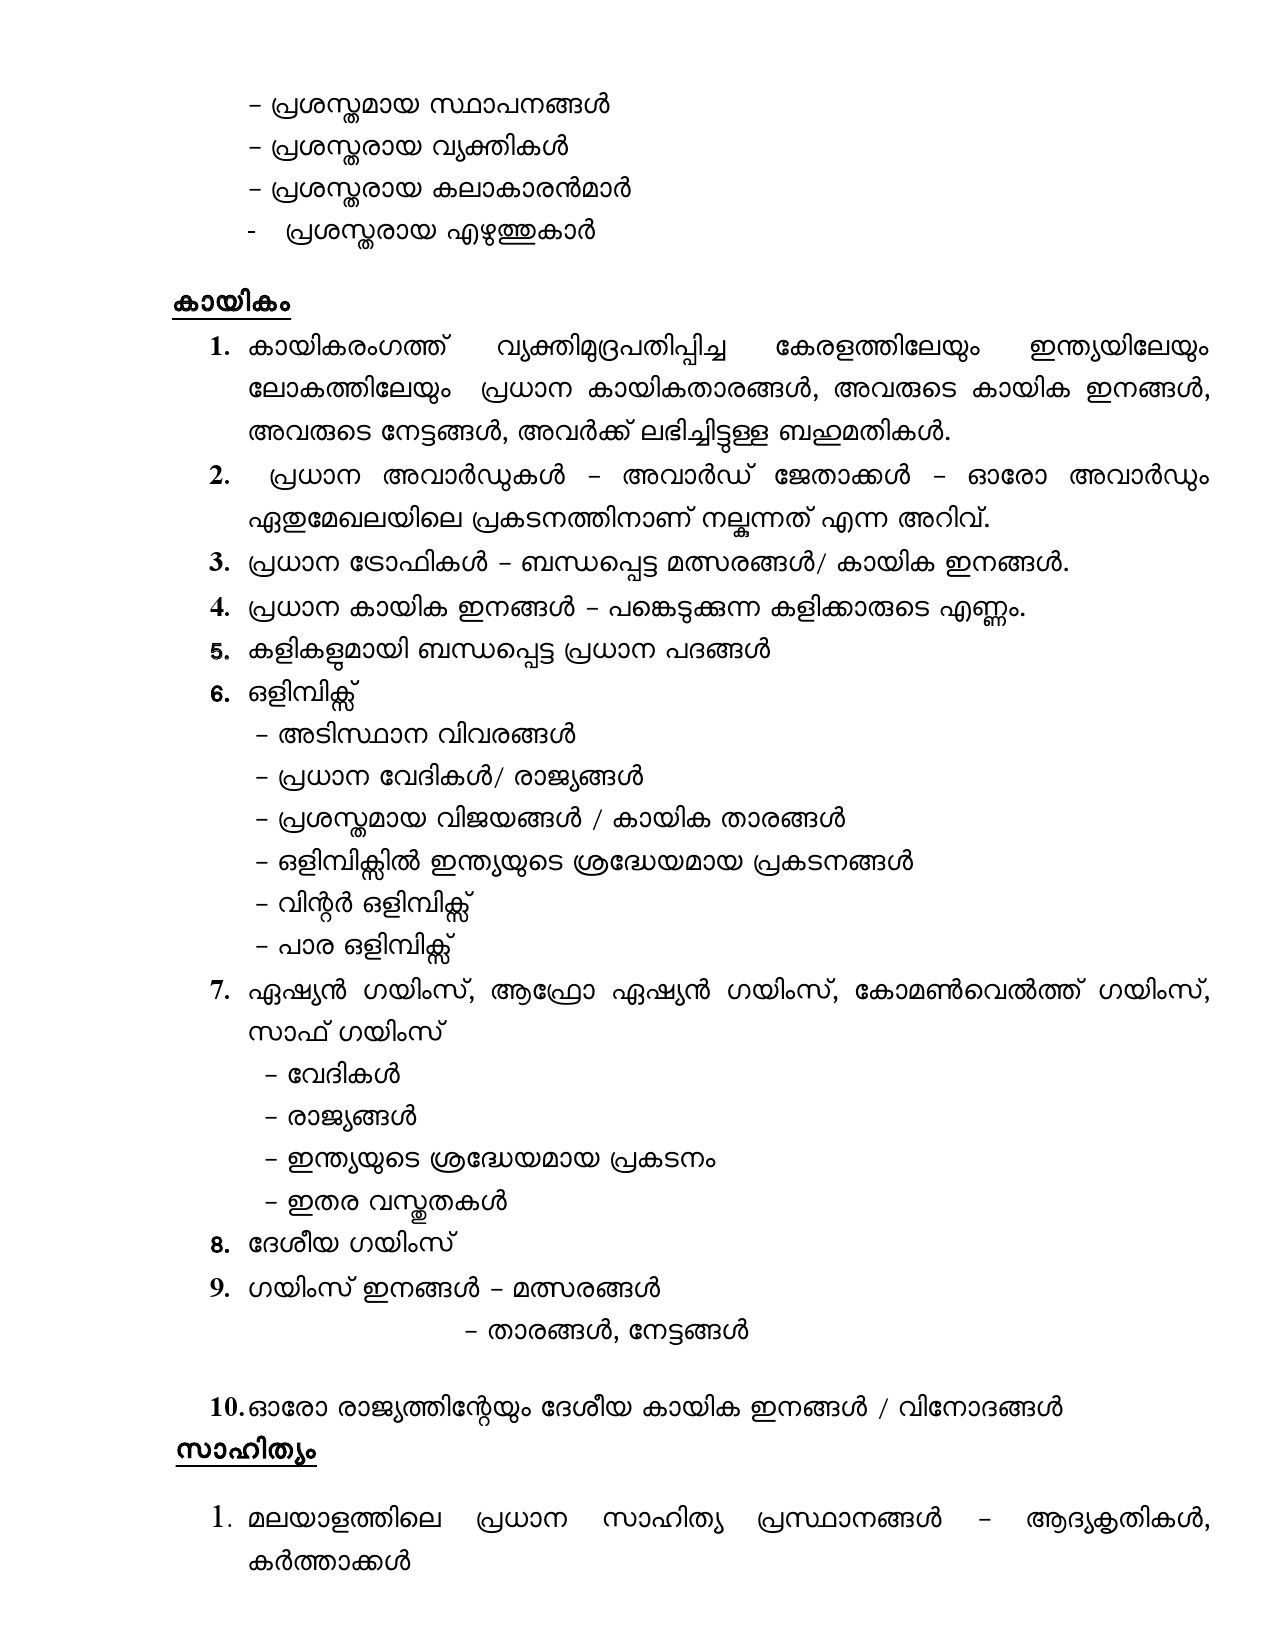 Civil Police Officer Final Examination Syllabus For Plus Two Level - Notification Image 6